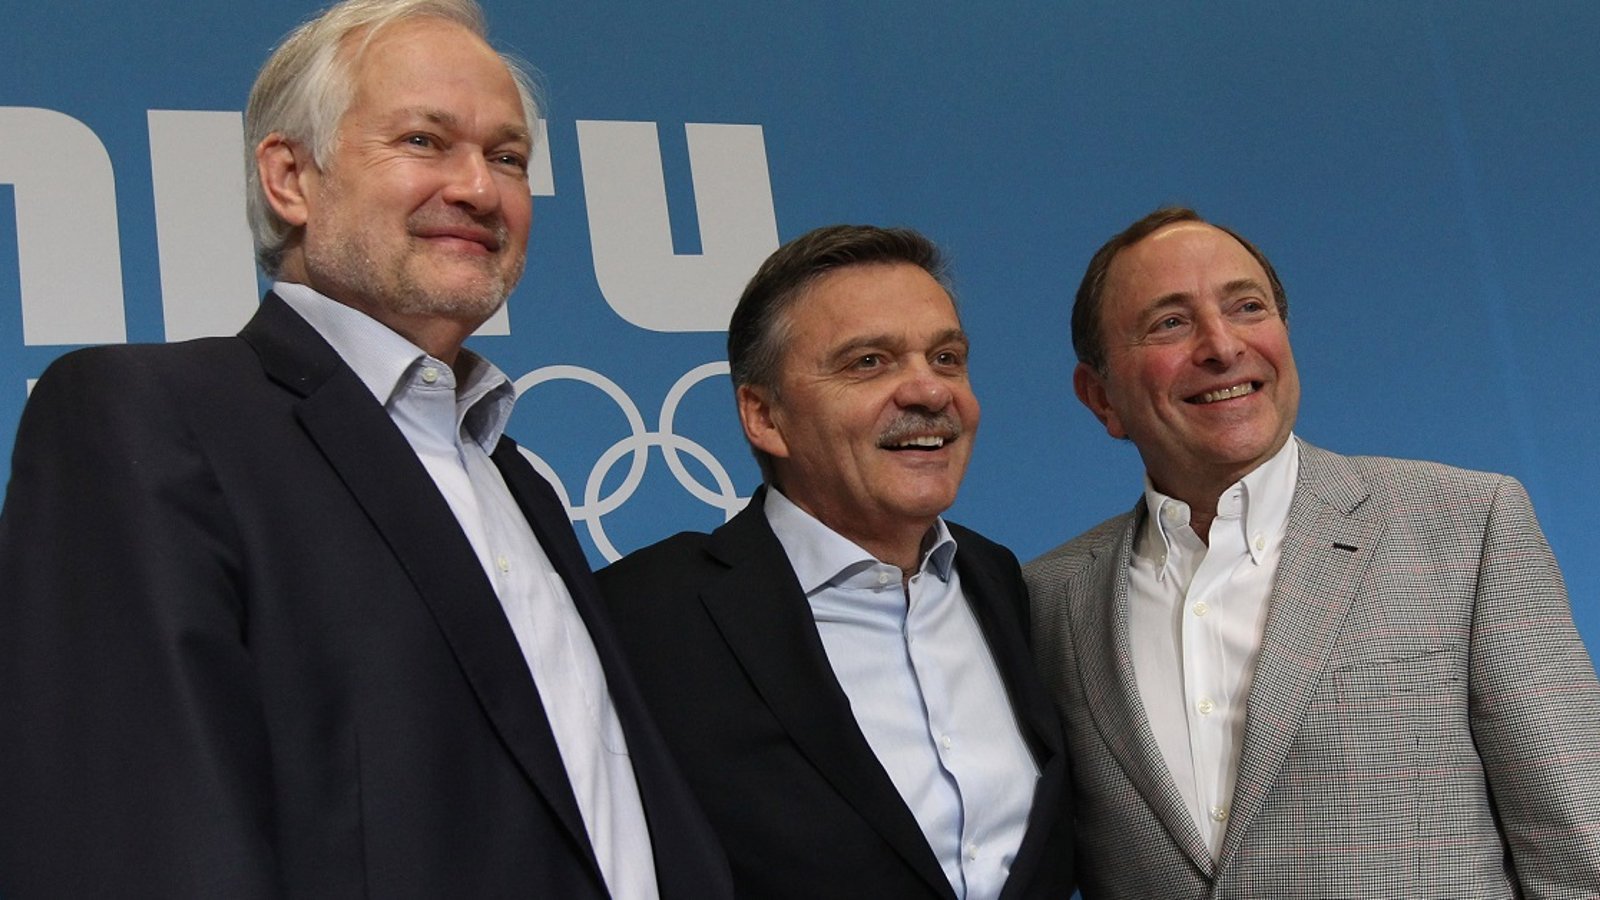 NHL may once again ban Olympic participation.